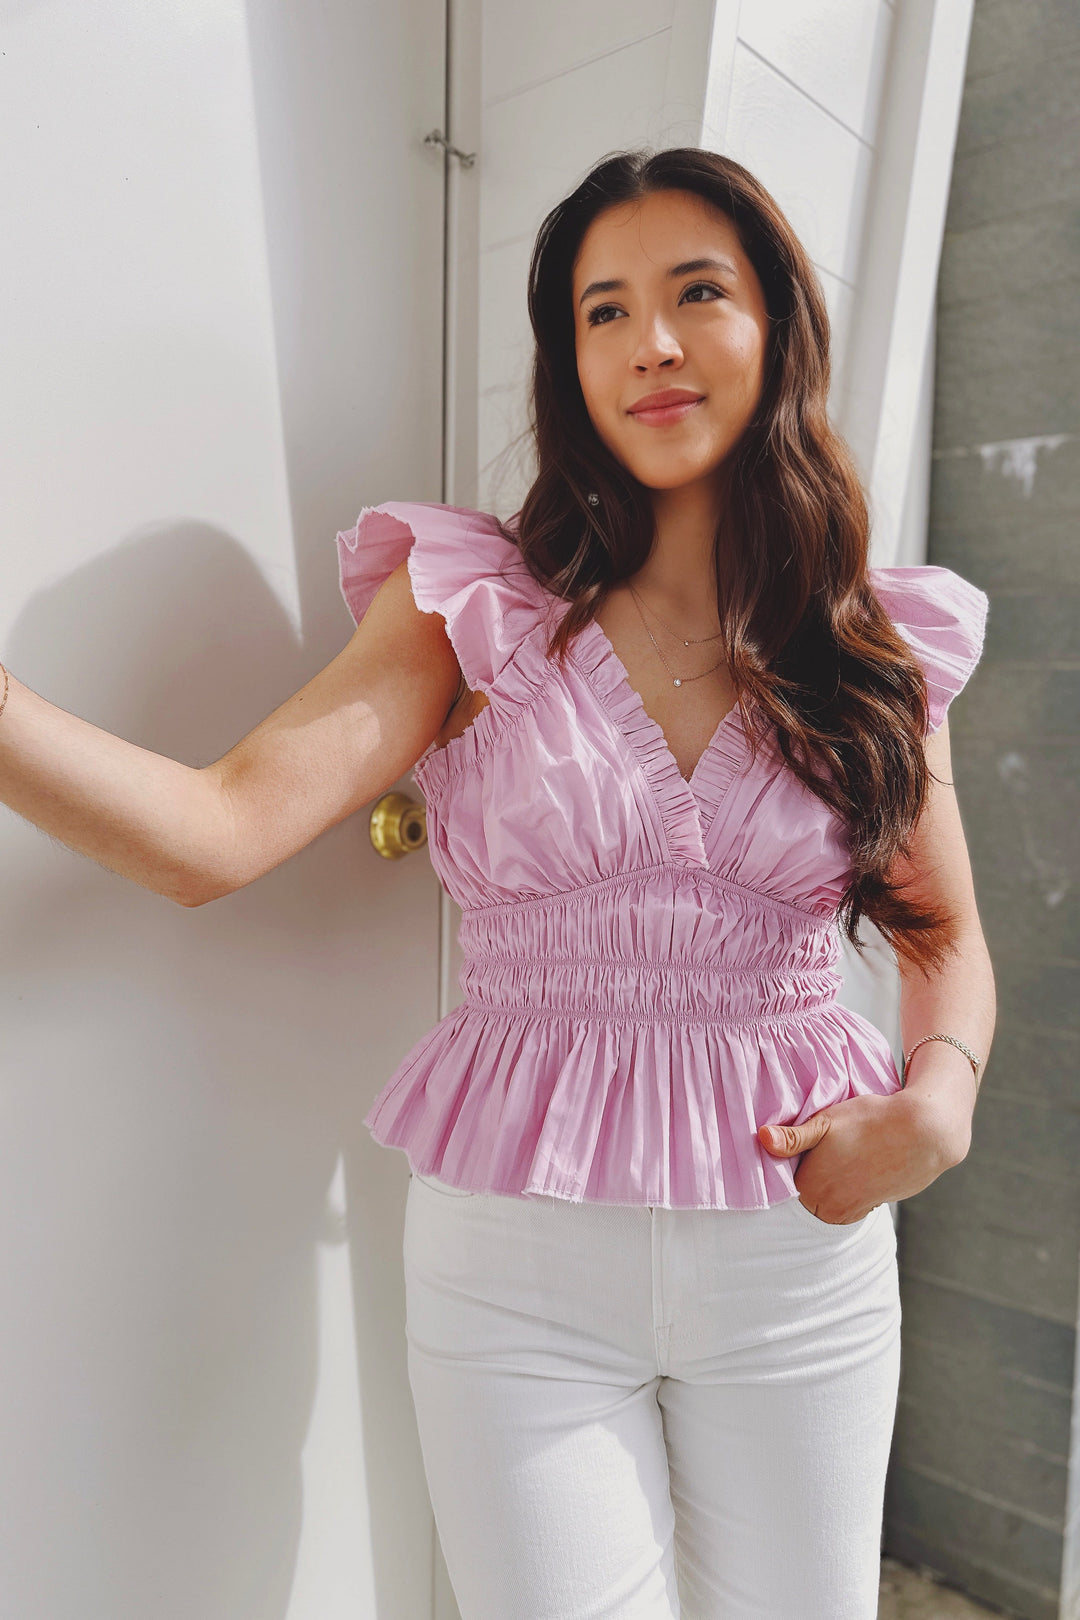 The Made You Look Pink Pleated Peplum Top